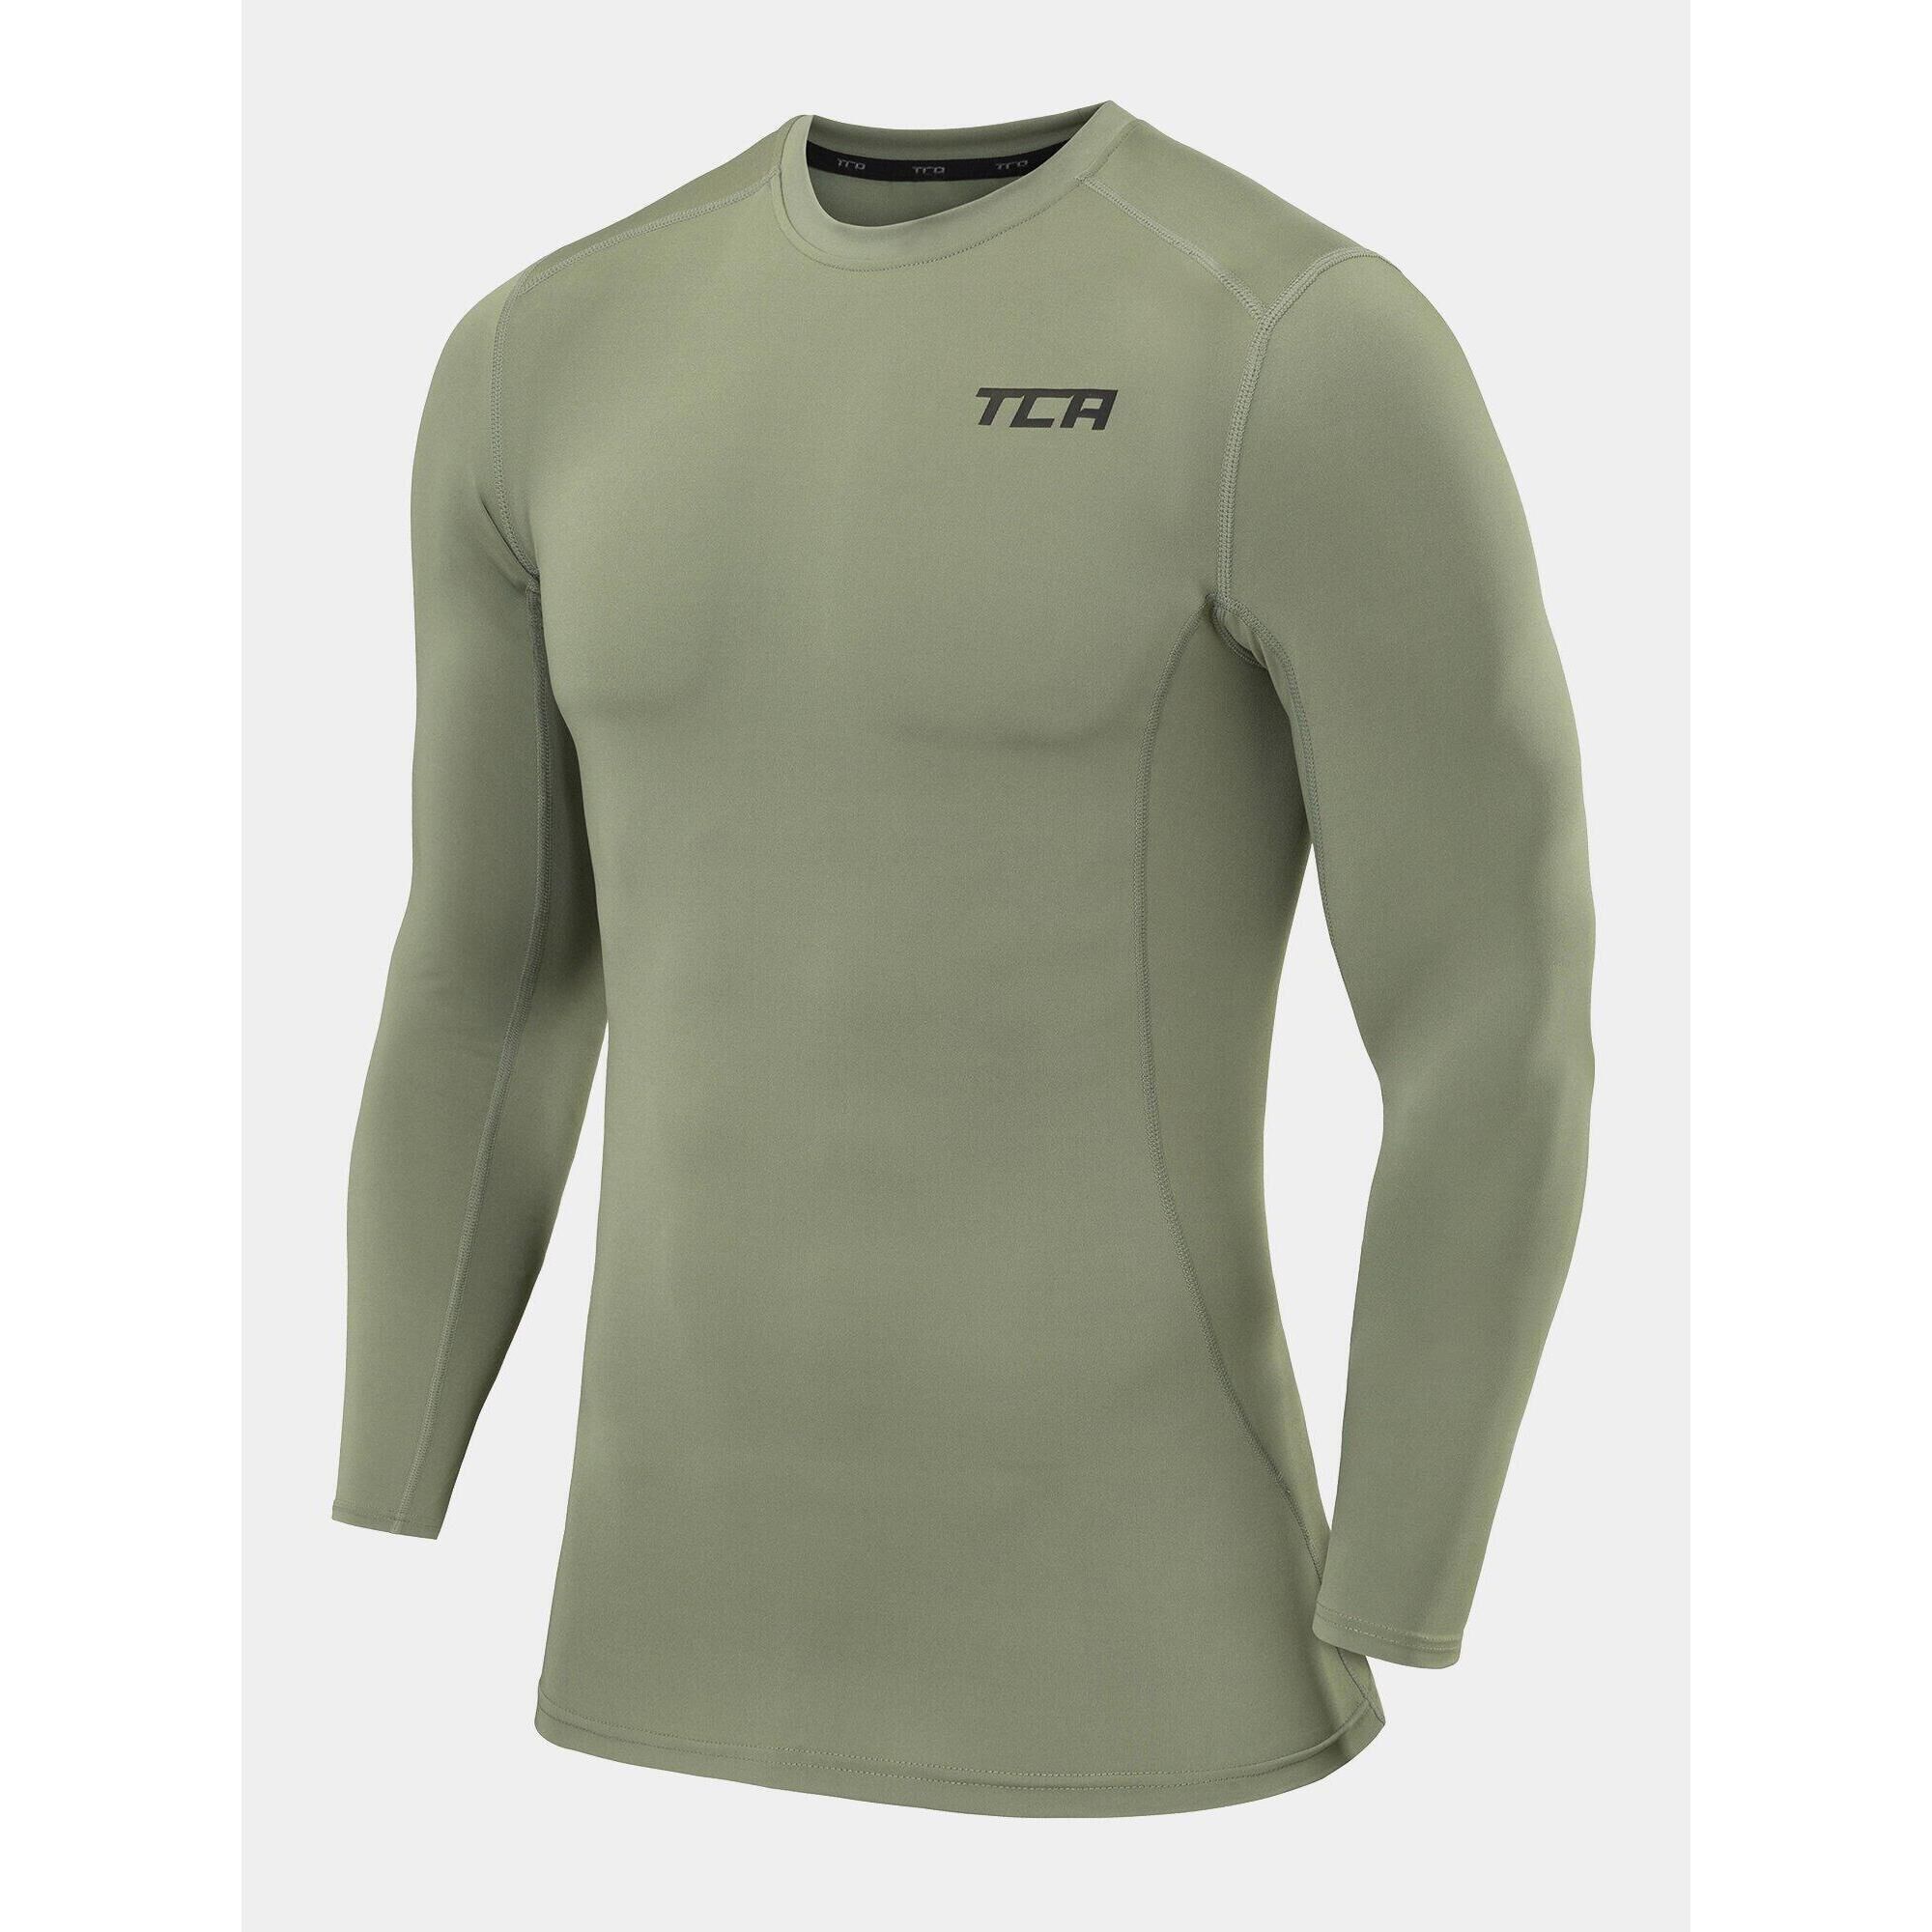 Men's Power Base Layer Compression Long Sleeve Top - Black Stealth